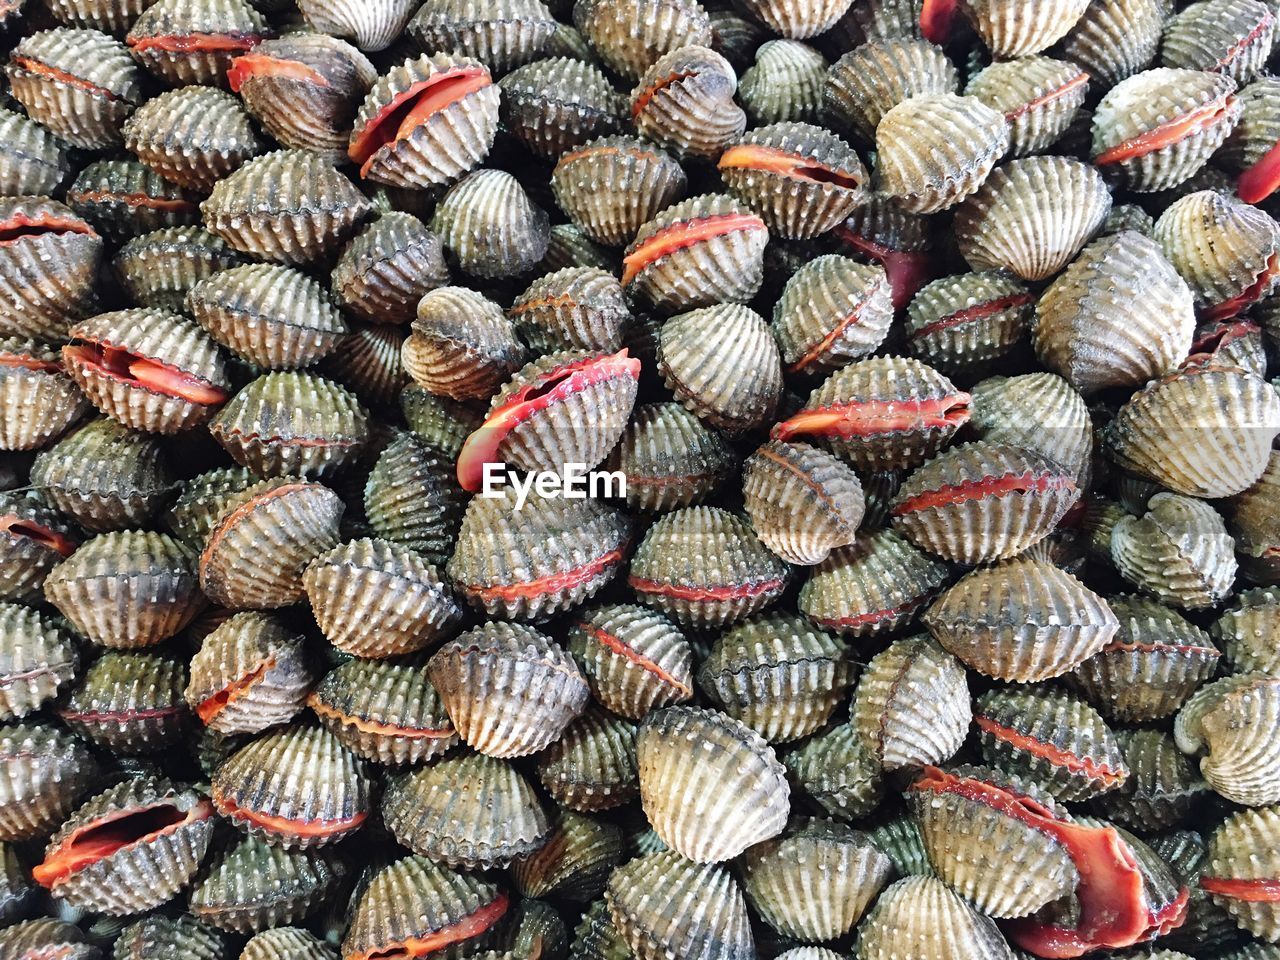 Cockles for sale at fish market